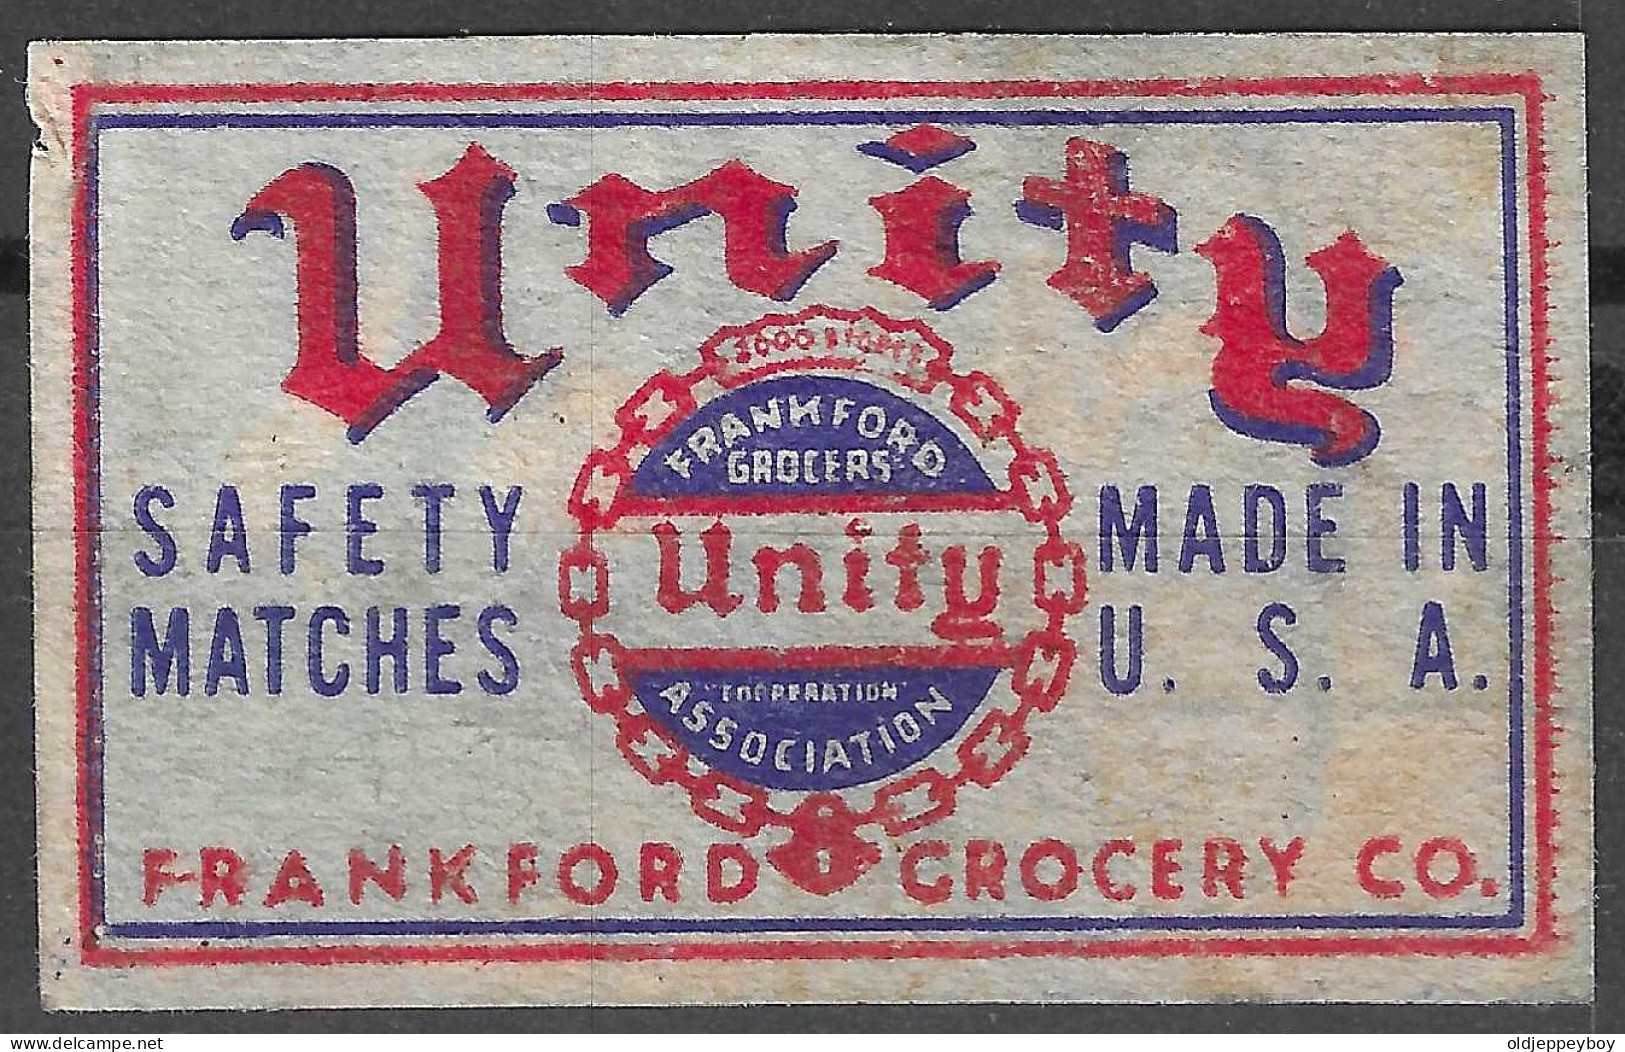  MADE IN U.S.A  Phillumeny MATCHBOX LABEL UNITY FRANKFORD GROCERY CO.3.5 X 5 CM - Matchbox Labels